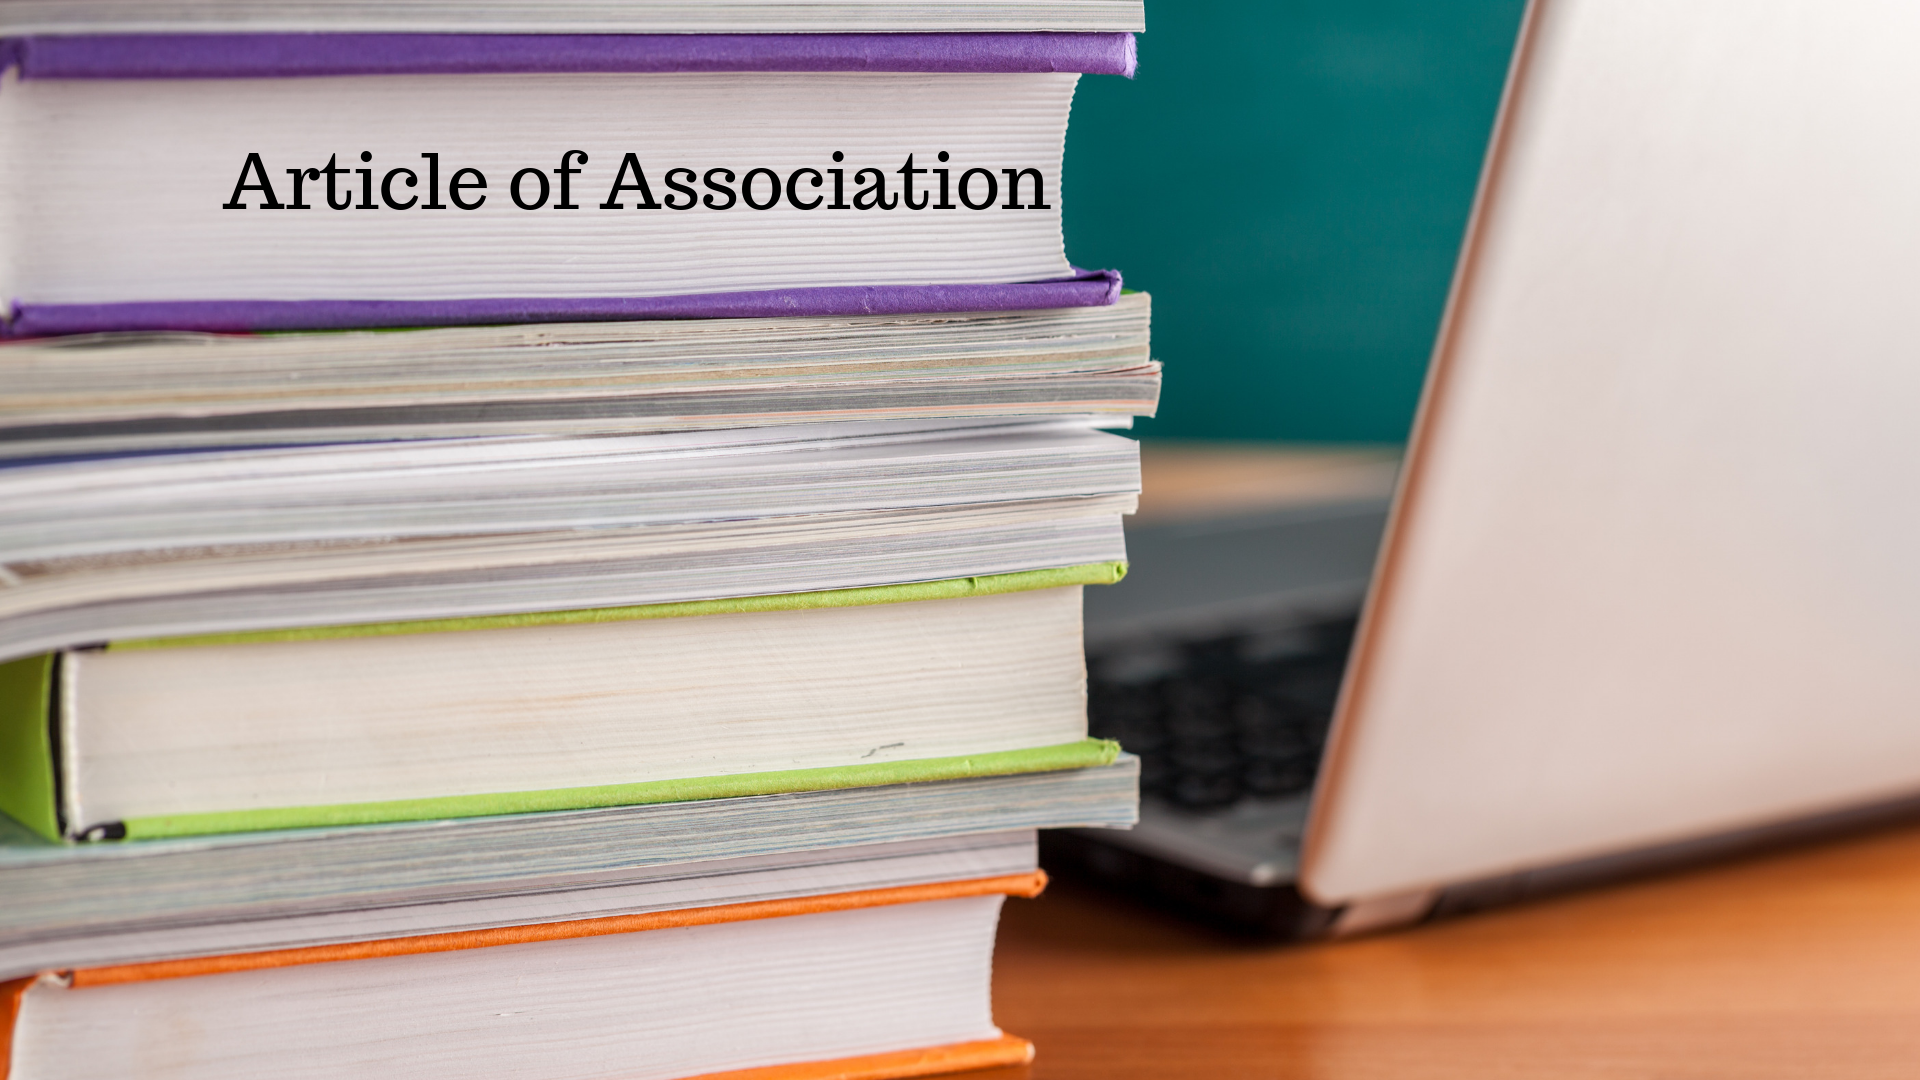 Article of Association Under Section 5 of the Companies Act, 2013